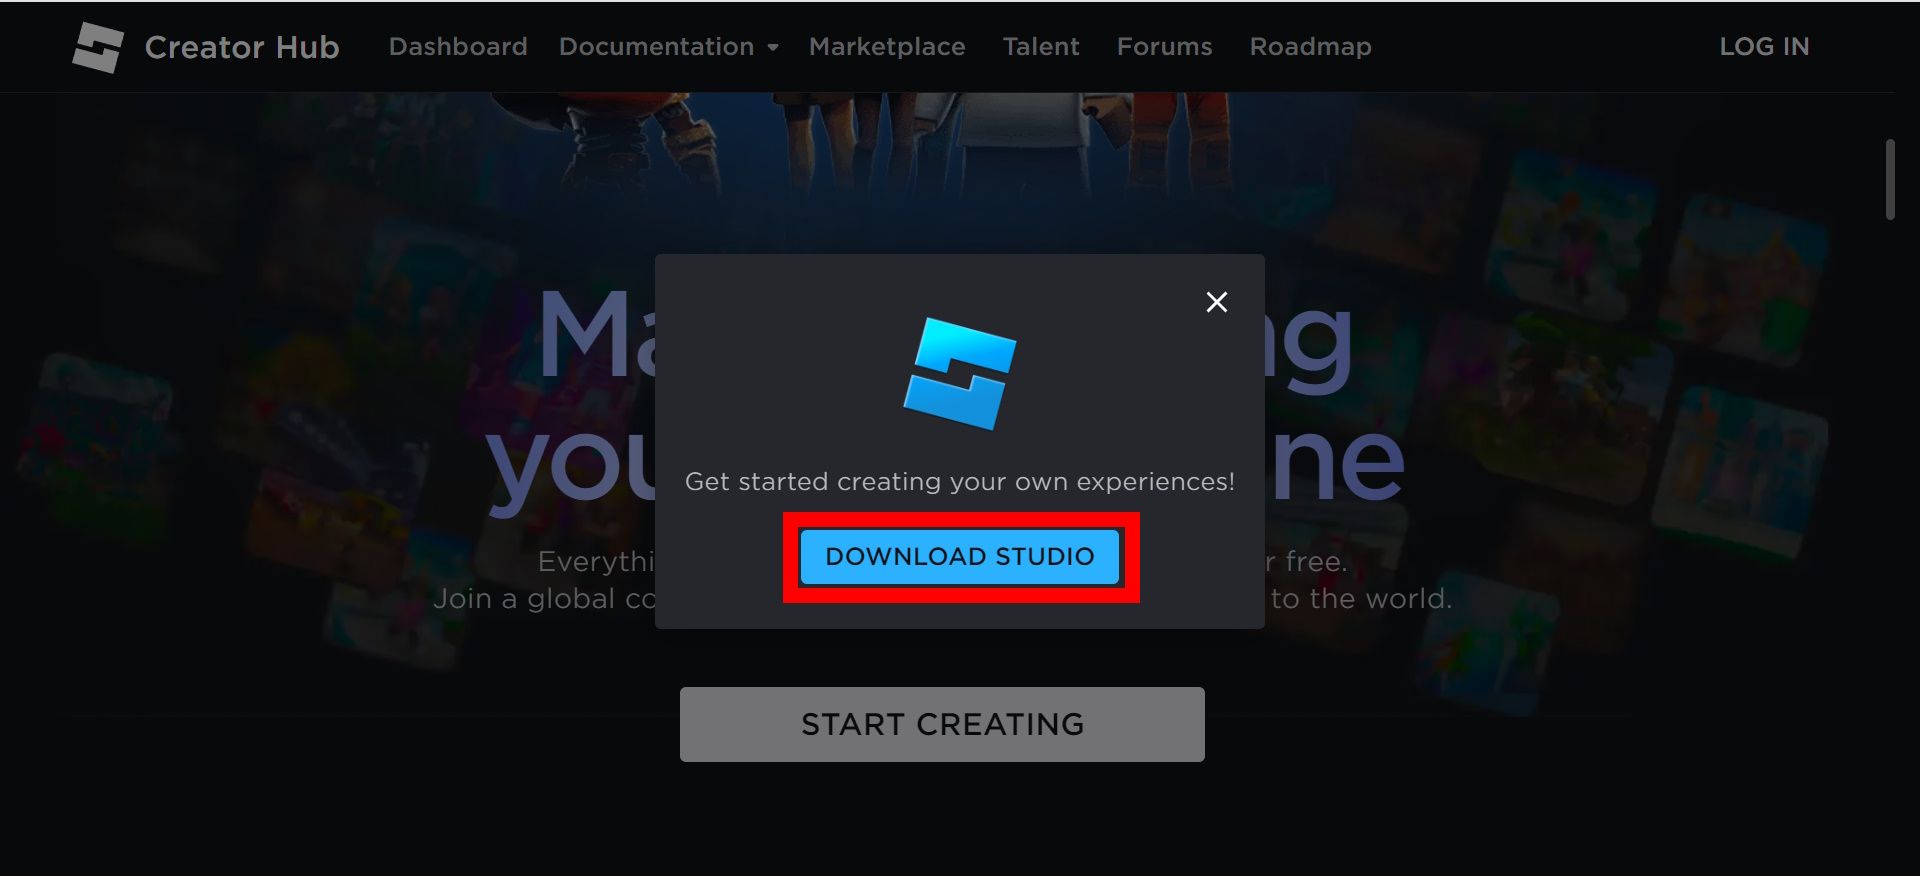 red rectangle outline over download studio button in pop up window